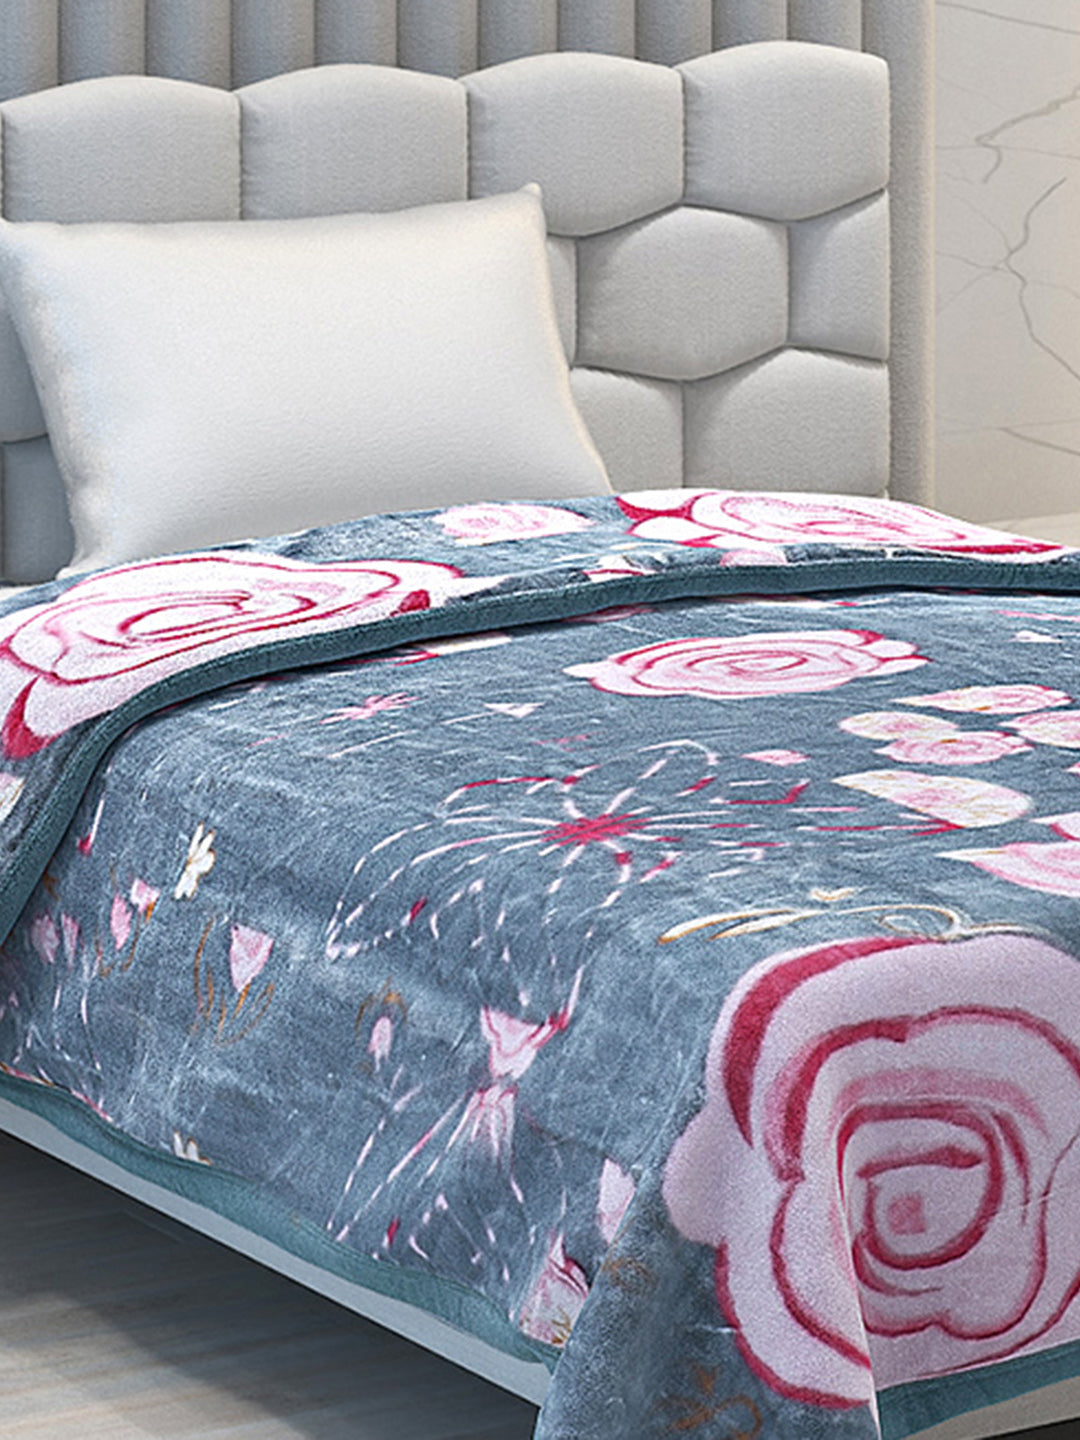 Printed Single Bed Blanket for Mild Winter -2 Ply